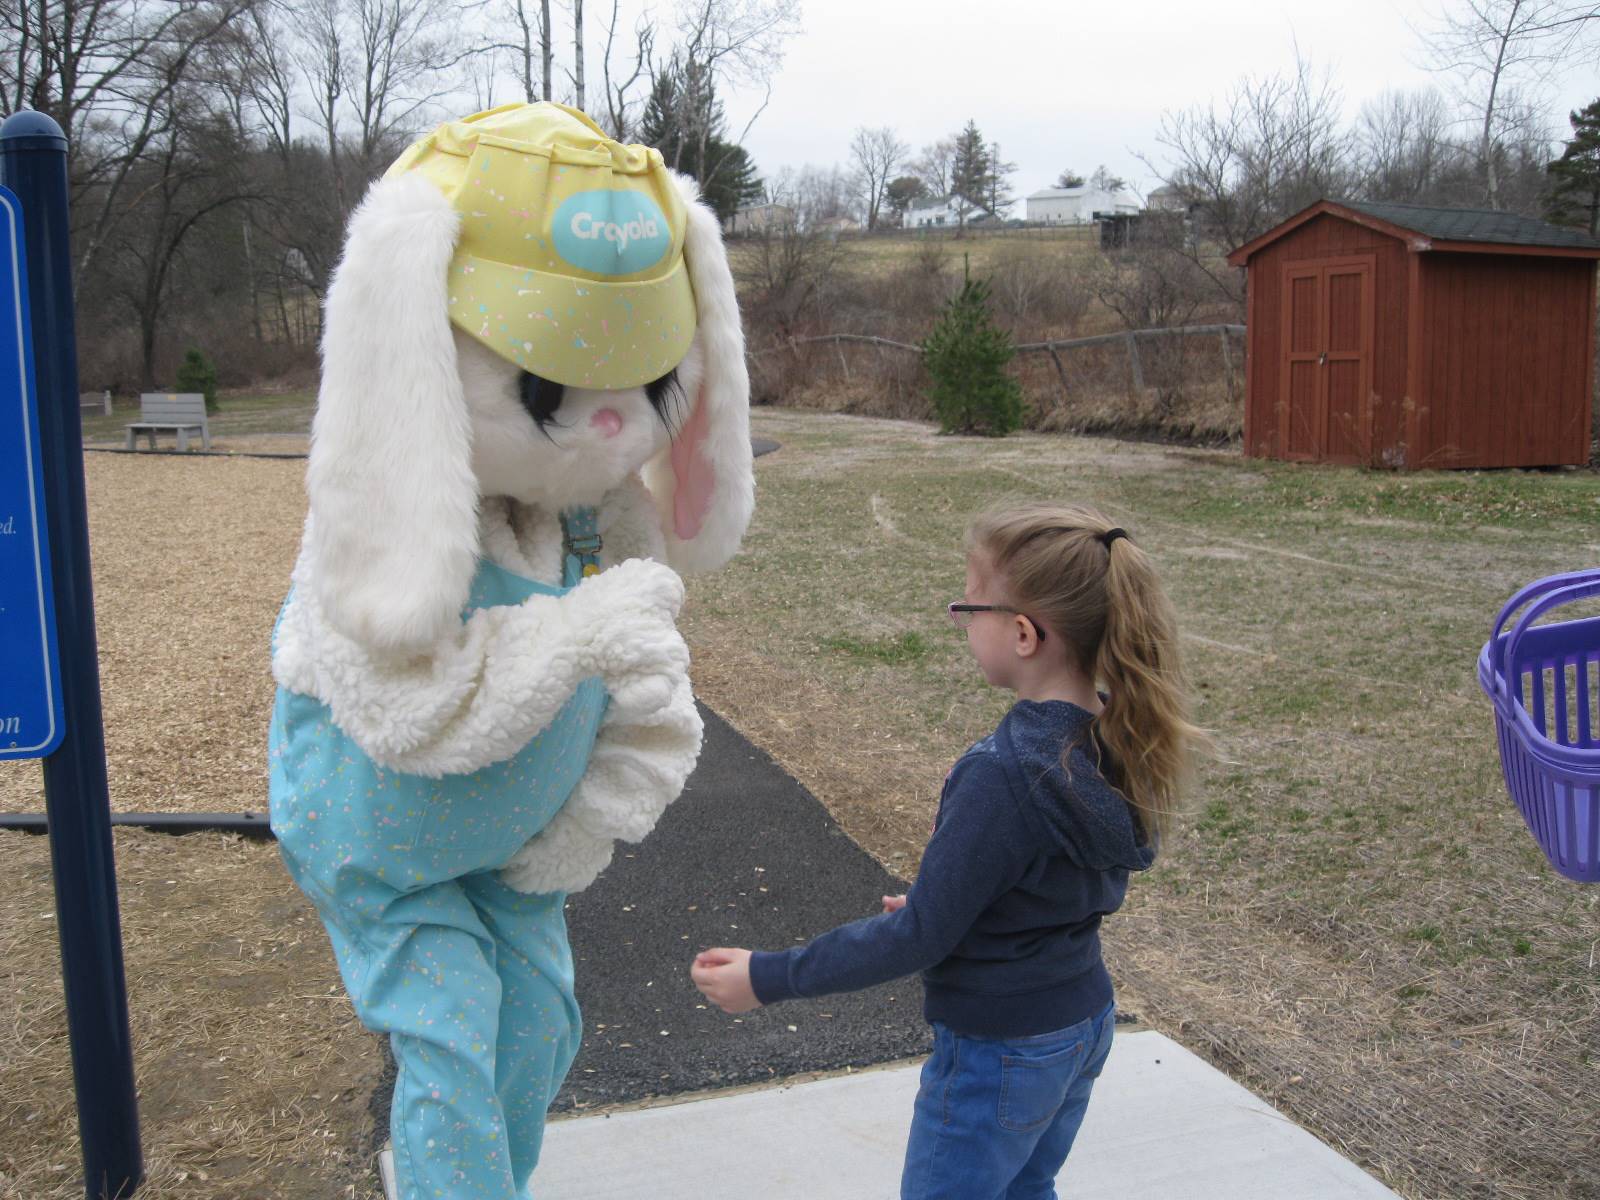 High five easter bunny!